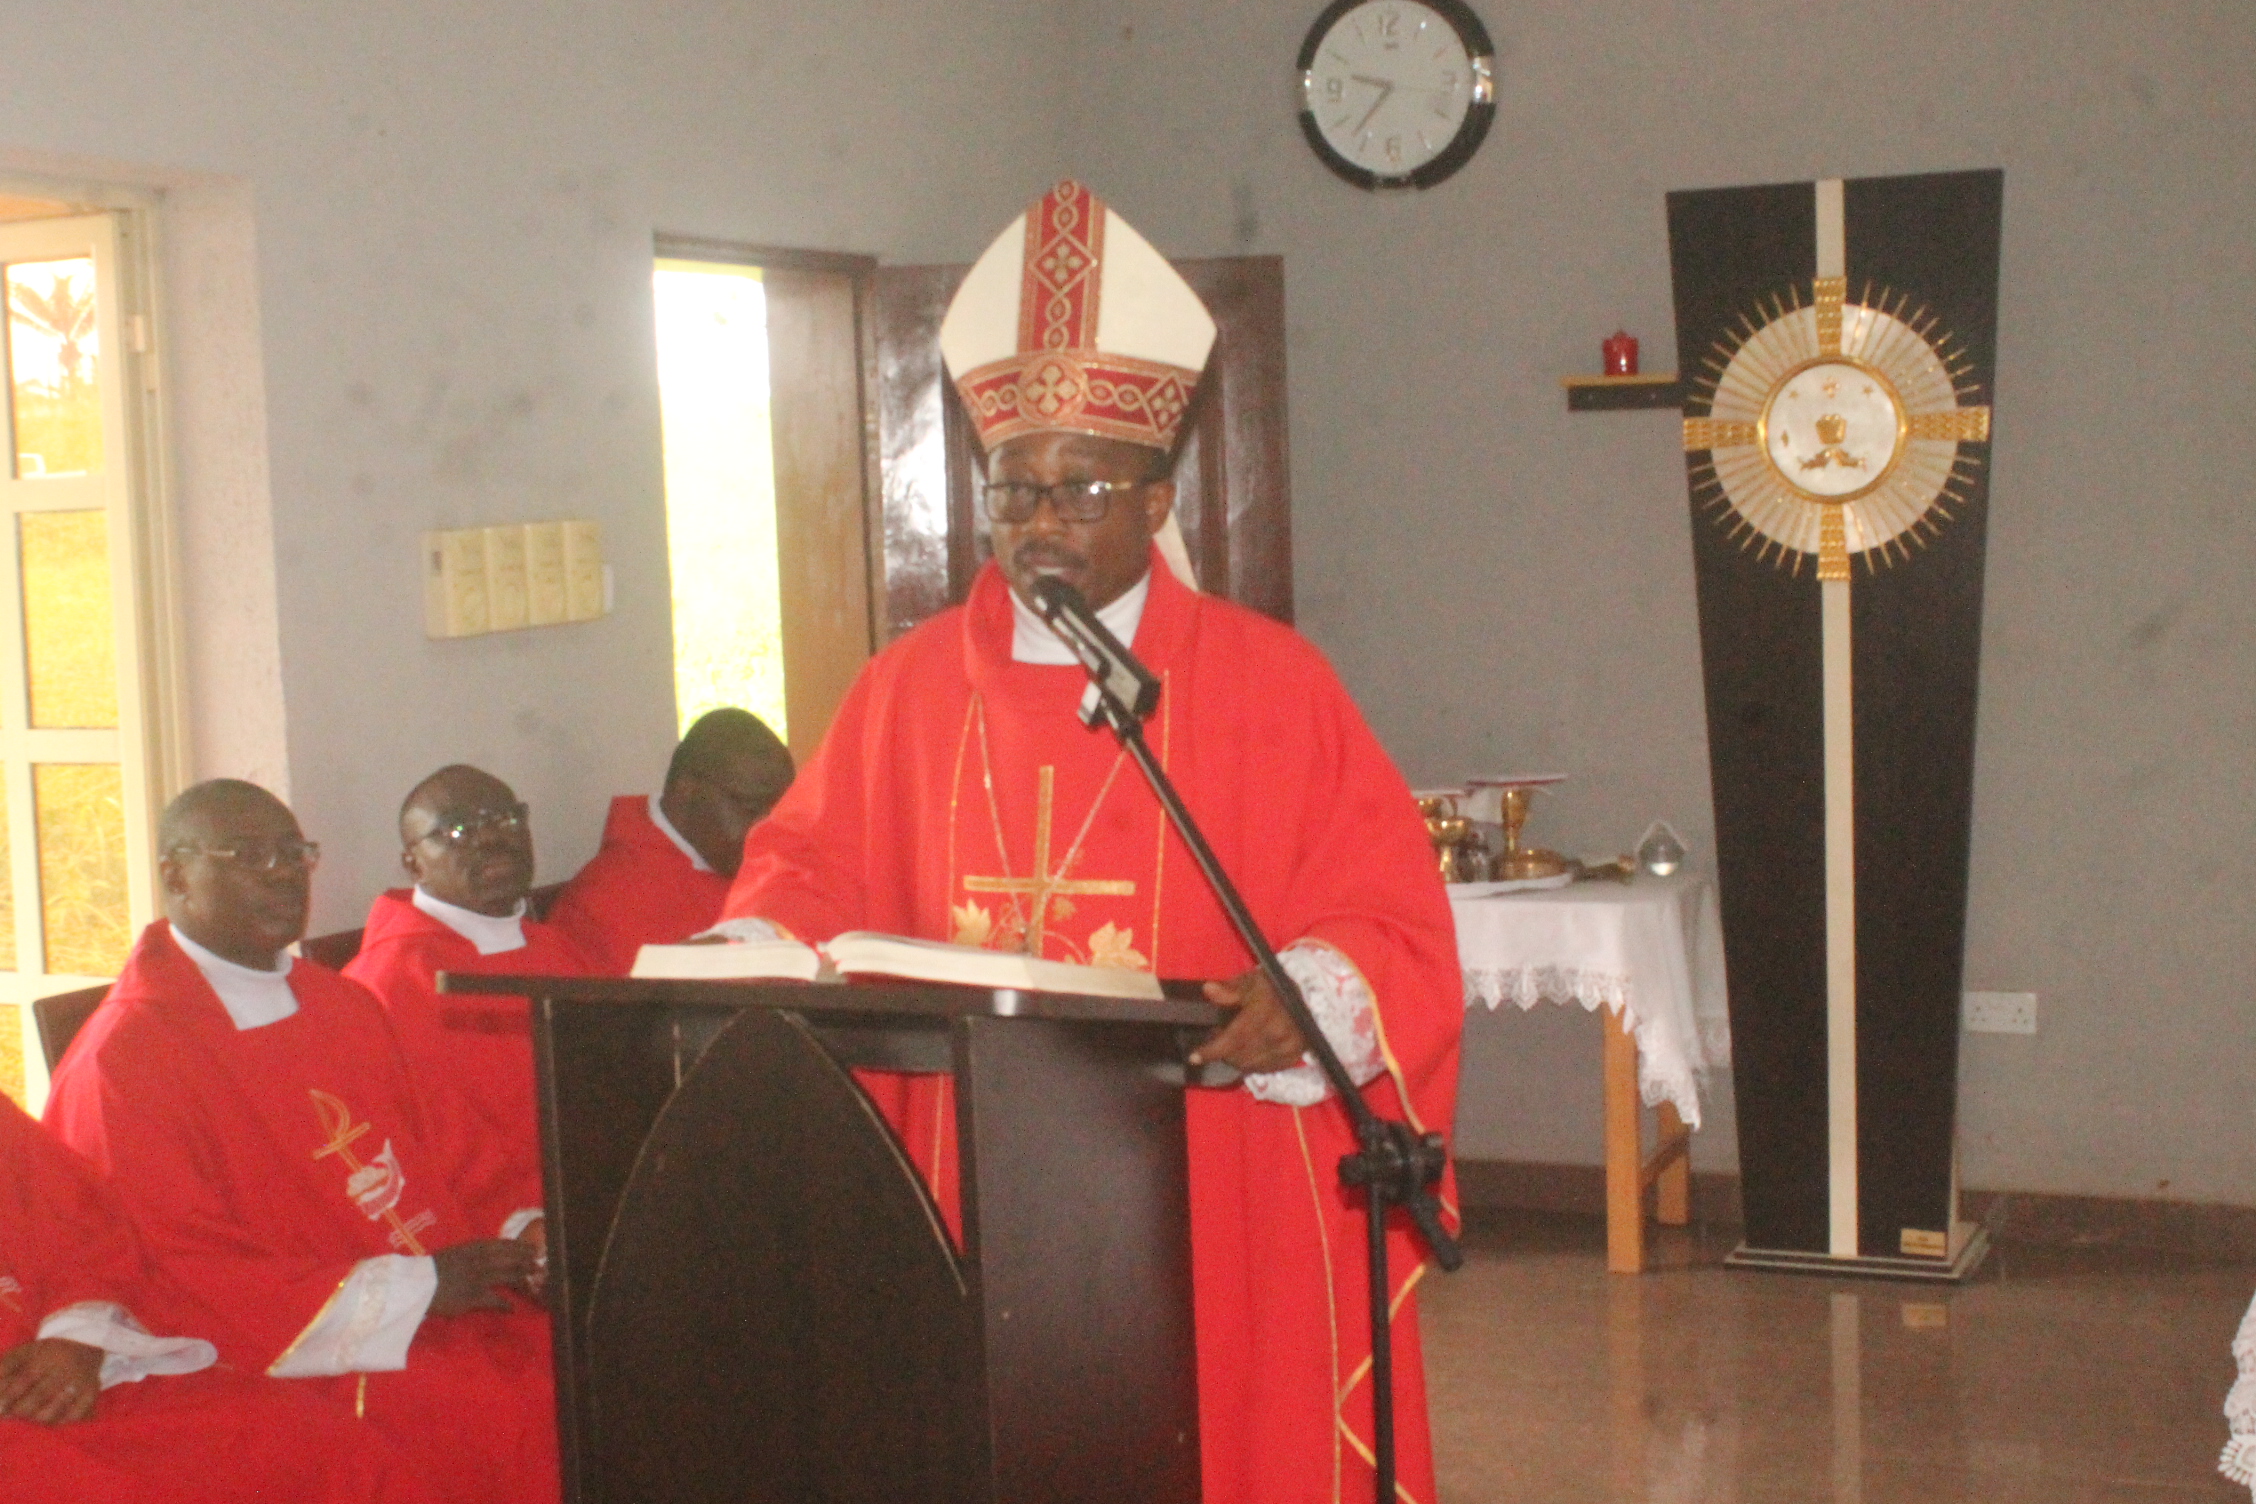 SAY NO TO IDEAOLOGIES THAT DO NOT AUGUR WELL WITH YOUR IDENTITY -  BISHOP ODETOYINBO ADMONISHED